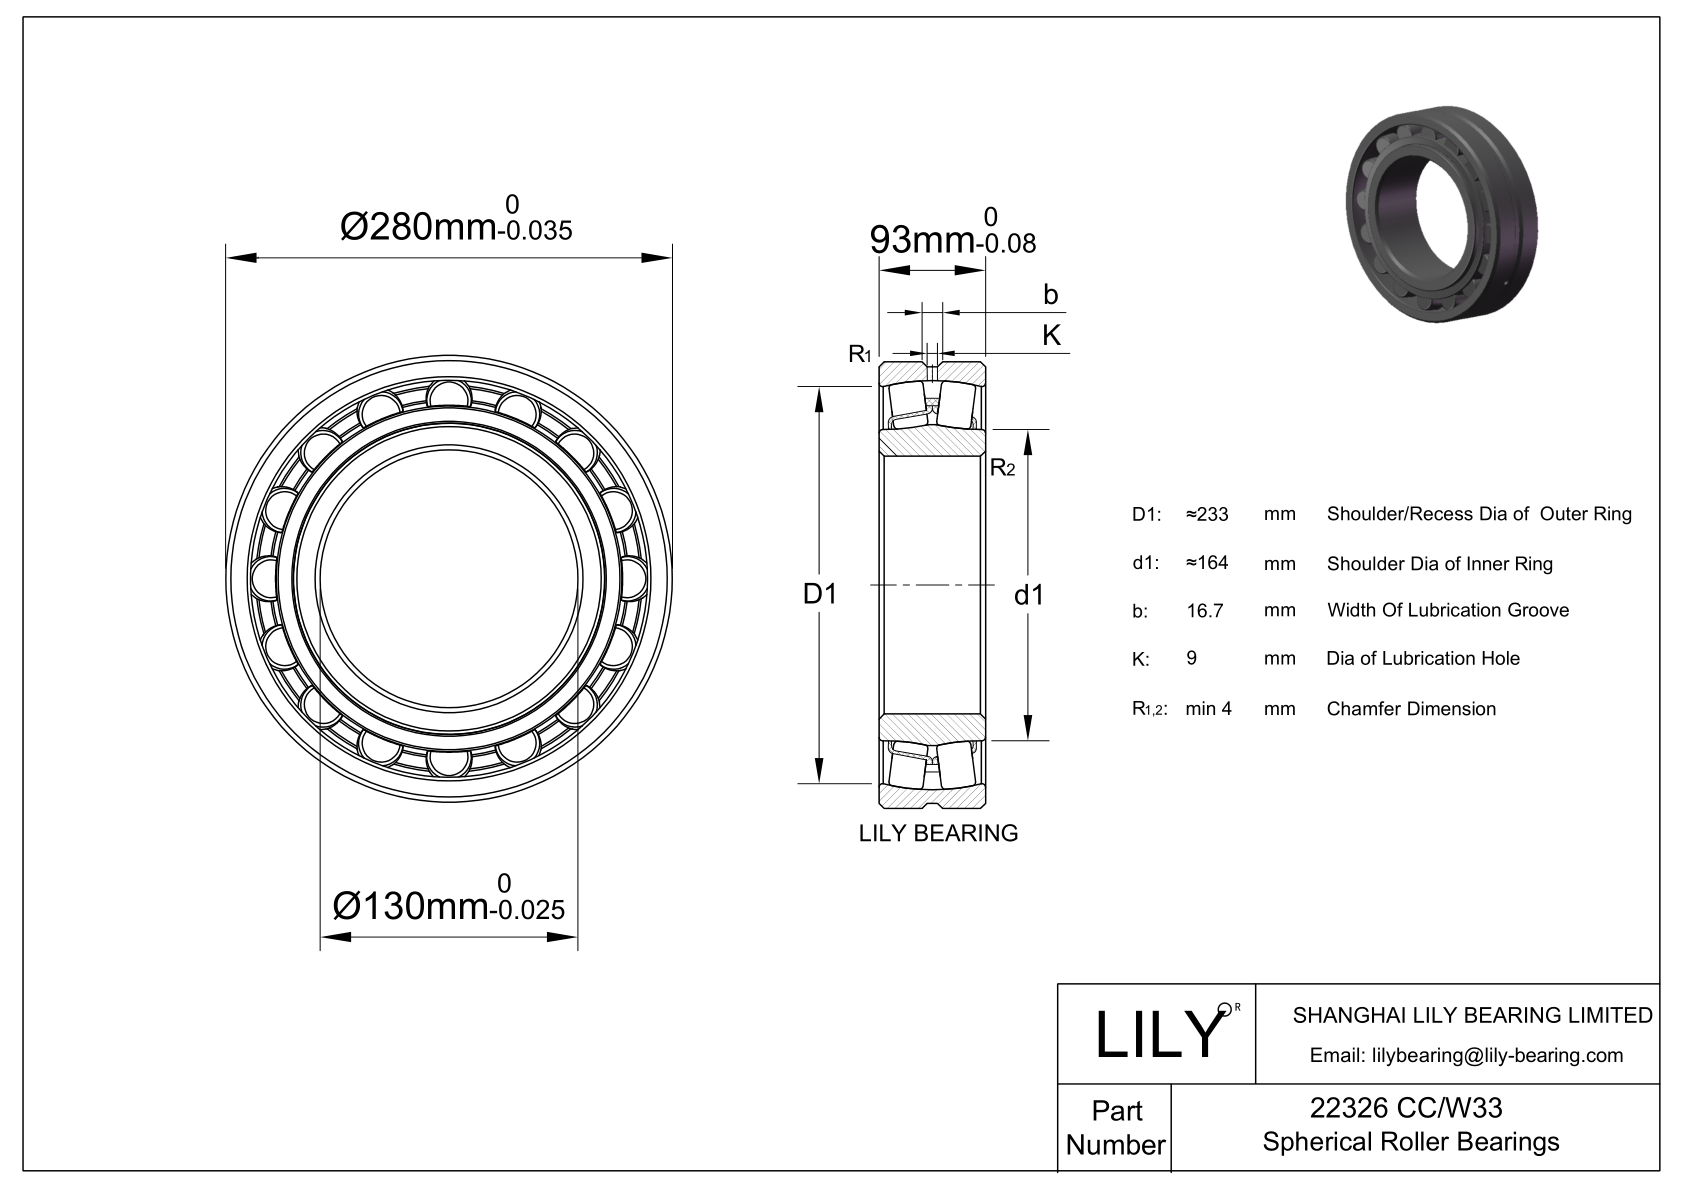 22326 CC/W33 Double Row Spherical Roller Bearing cad drawing